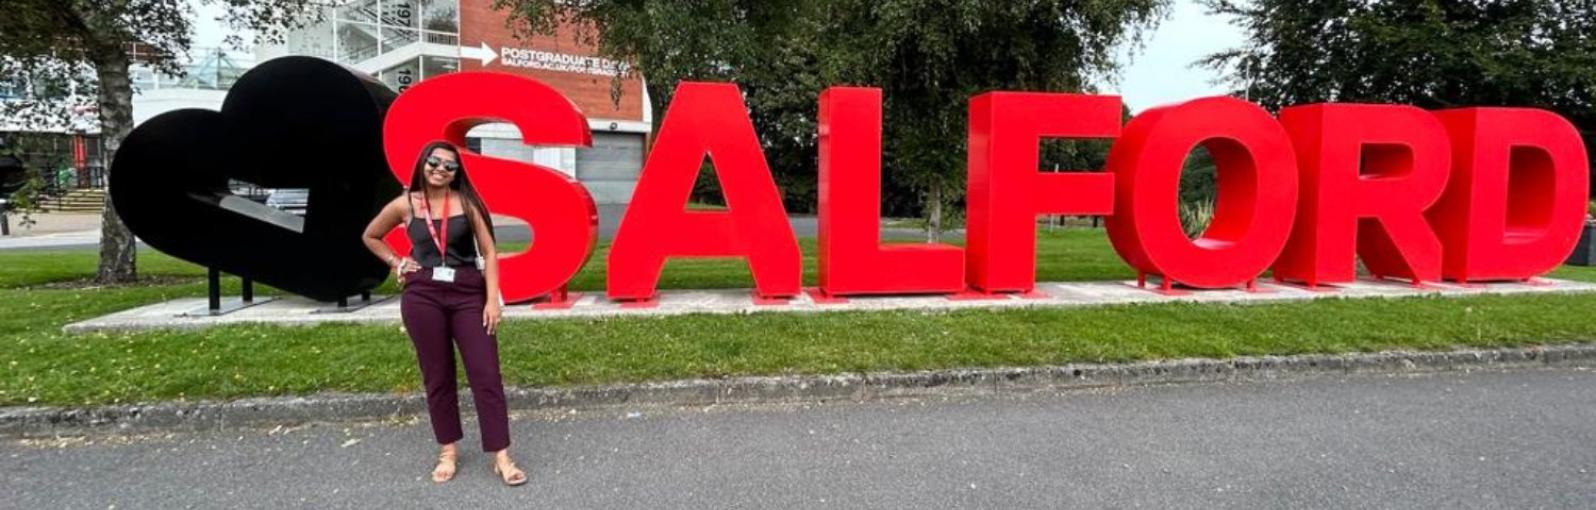 A female student stood in front of the Salford sign